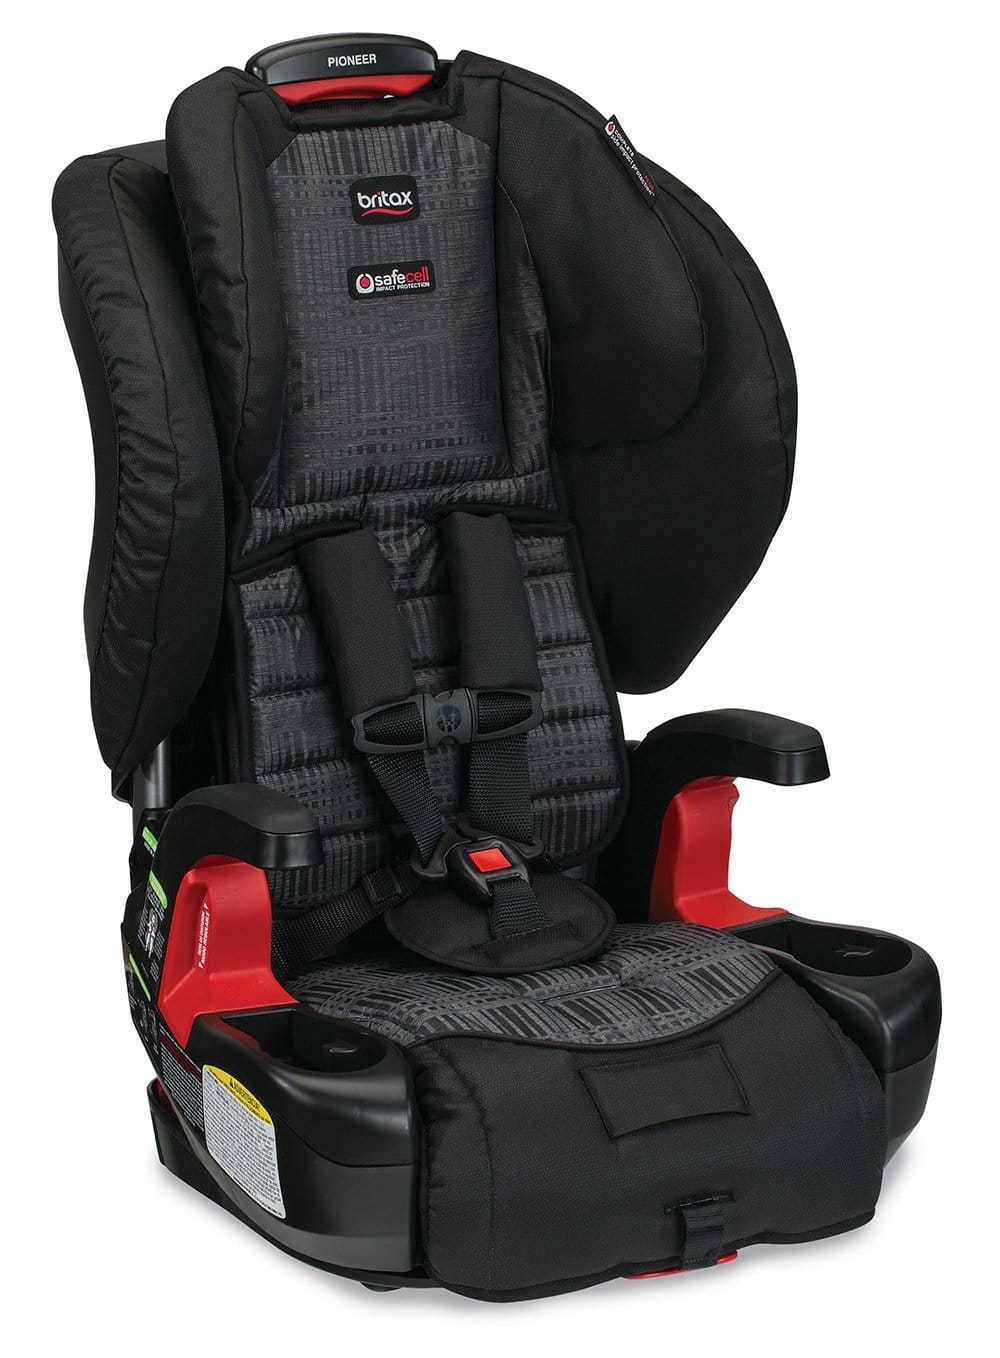 Britax Pioneer Combination Harness High Back Booster Seat 